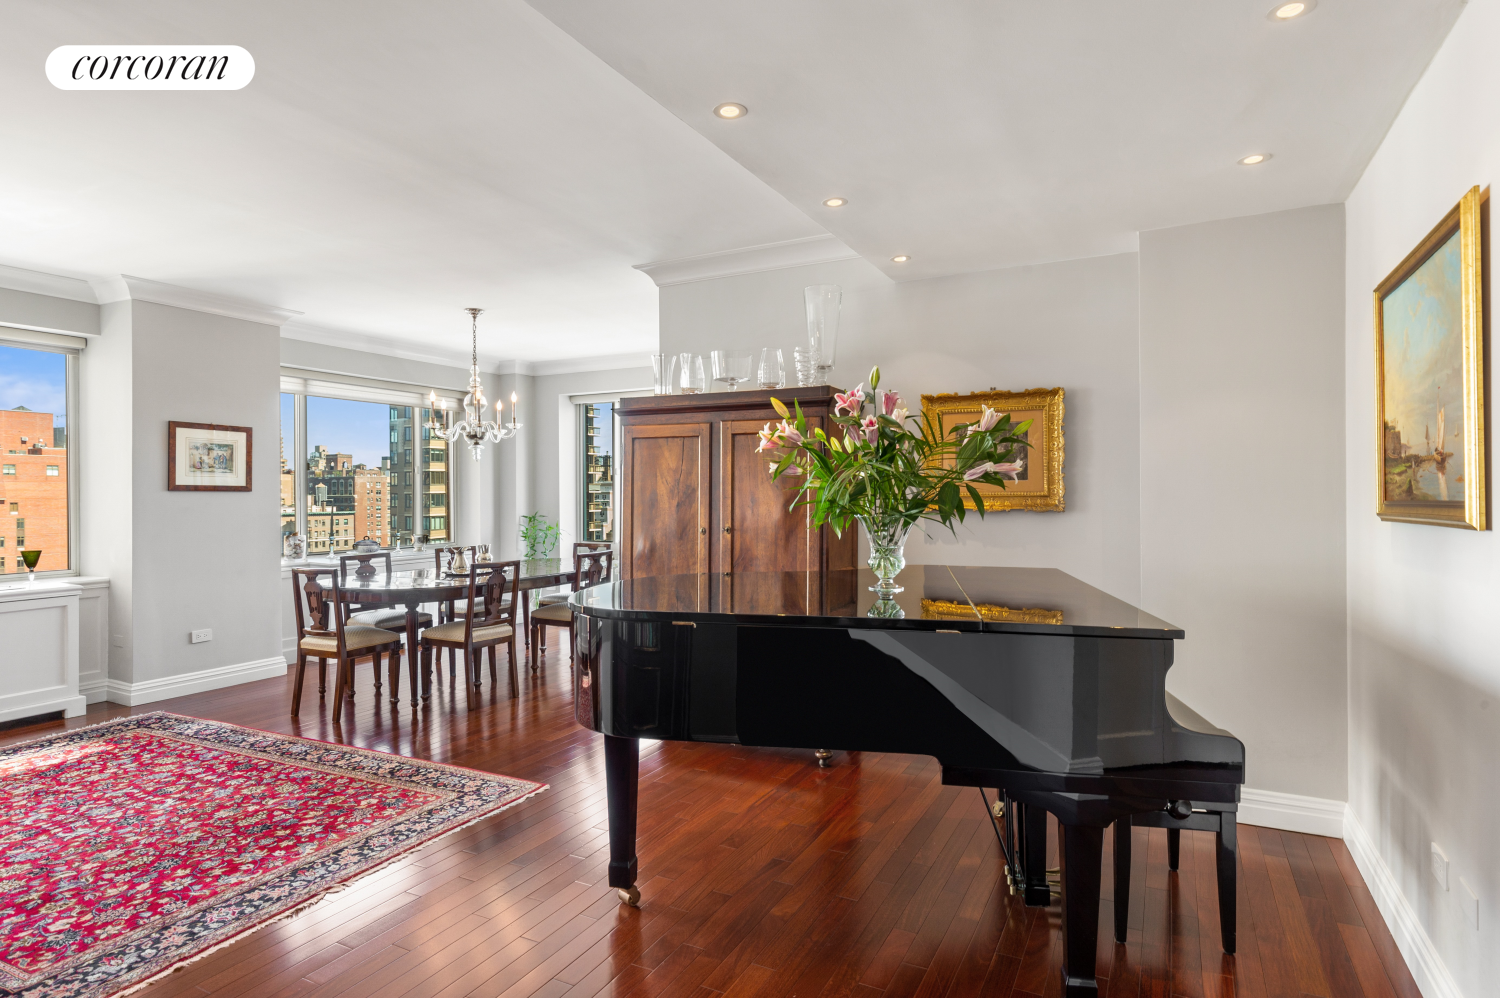 201 East 80th Street 16A, Yorkville, Upper East Side, NYC - 3 Bedrooms  
3 Bathrooms  
8 Rooms - 